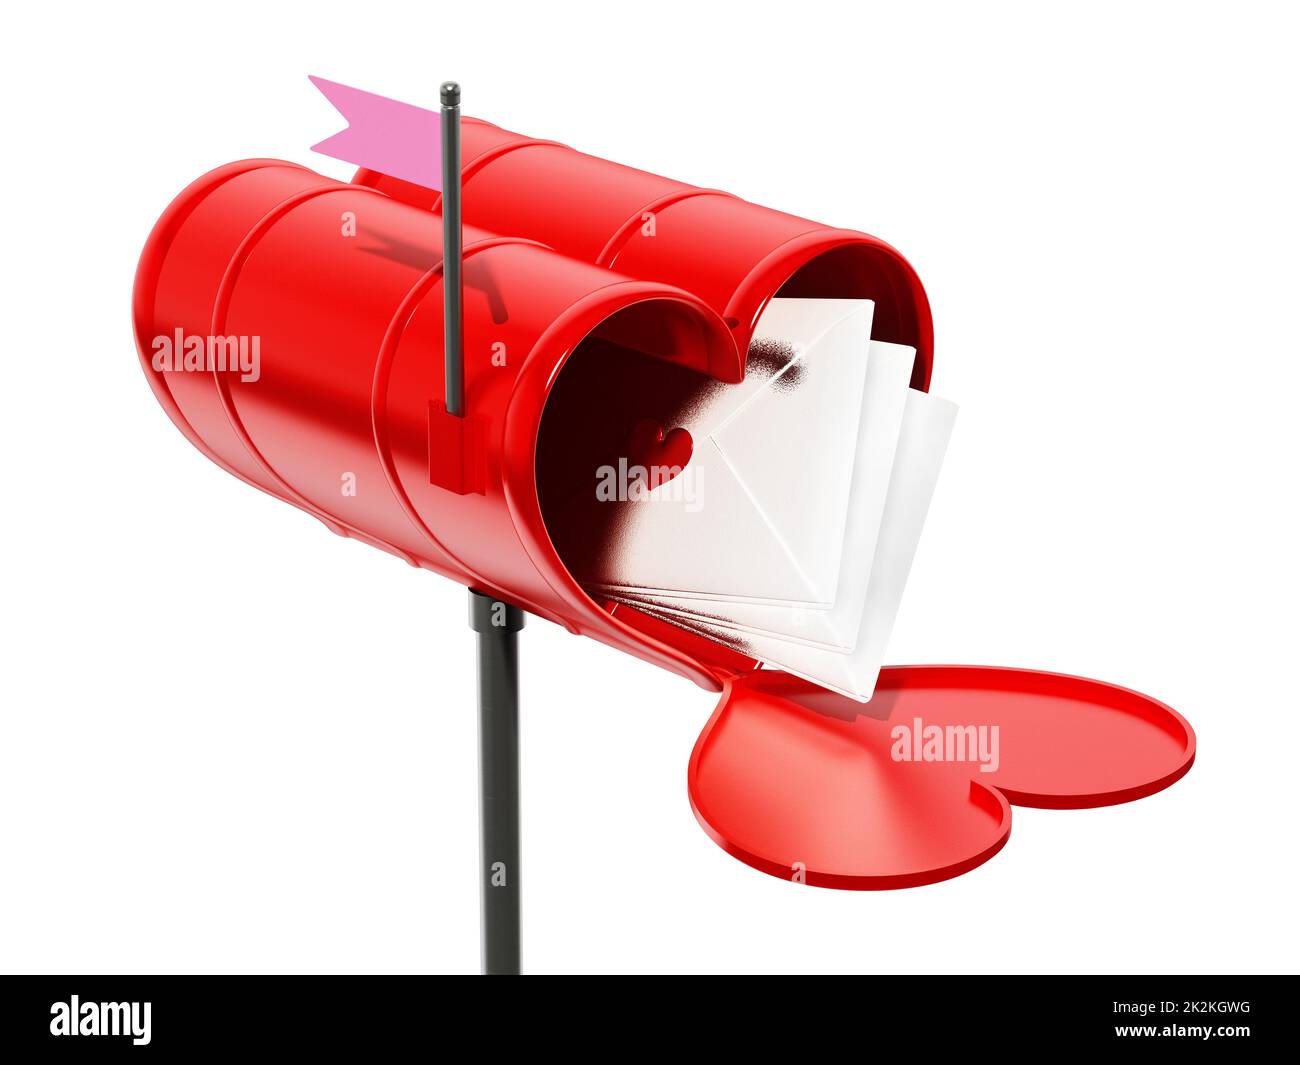 Red mailbox with letters Stock Photo by ©Alexynder 11444152